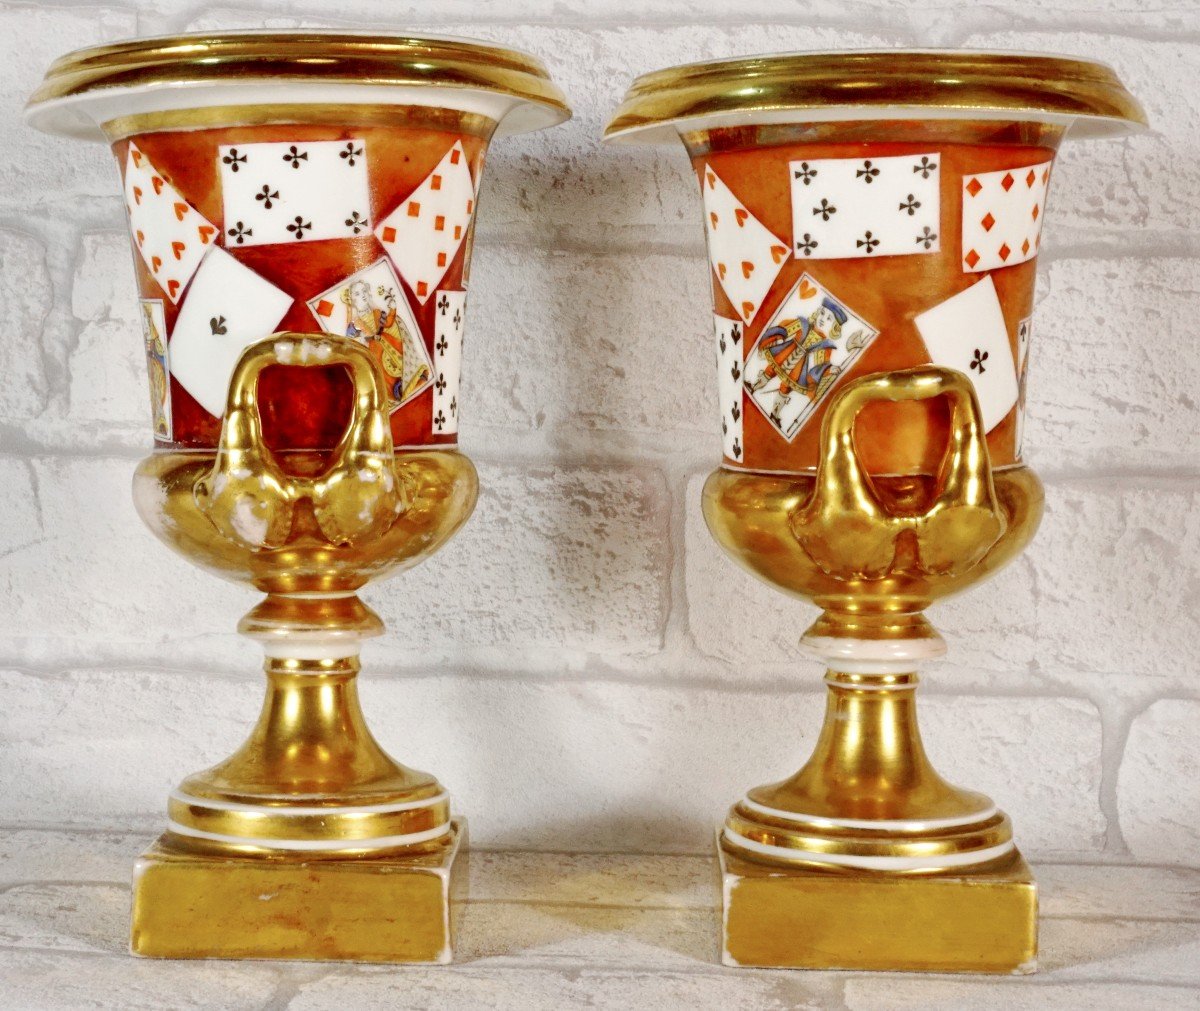 Rare Pair Of Medici Vases In Paris Porcelain Decorated With Playing Cards - Ep. Early 19th Century-photo-1